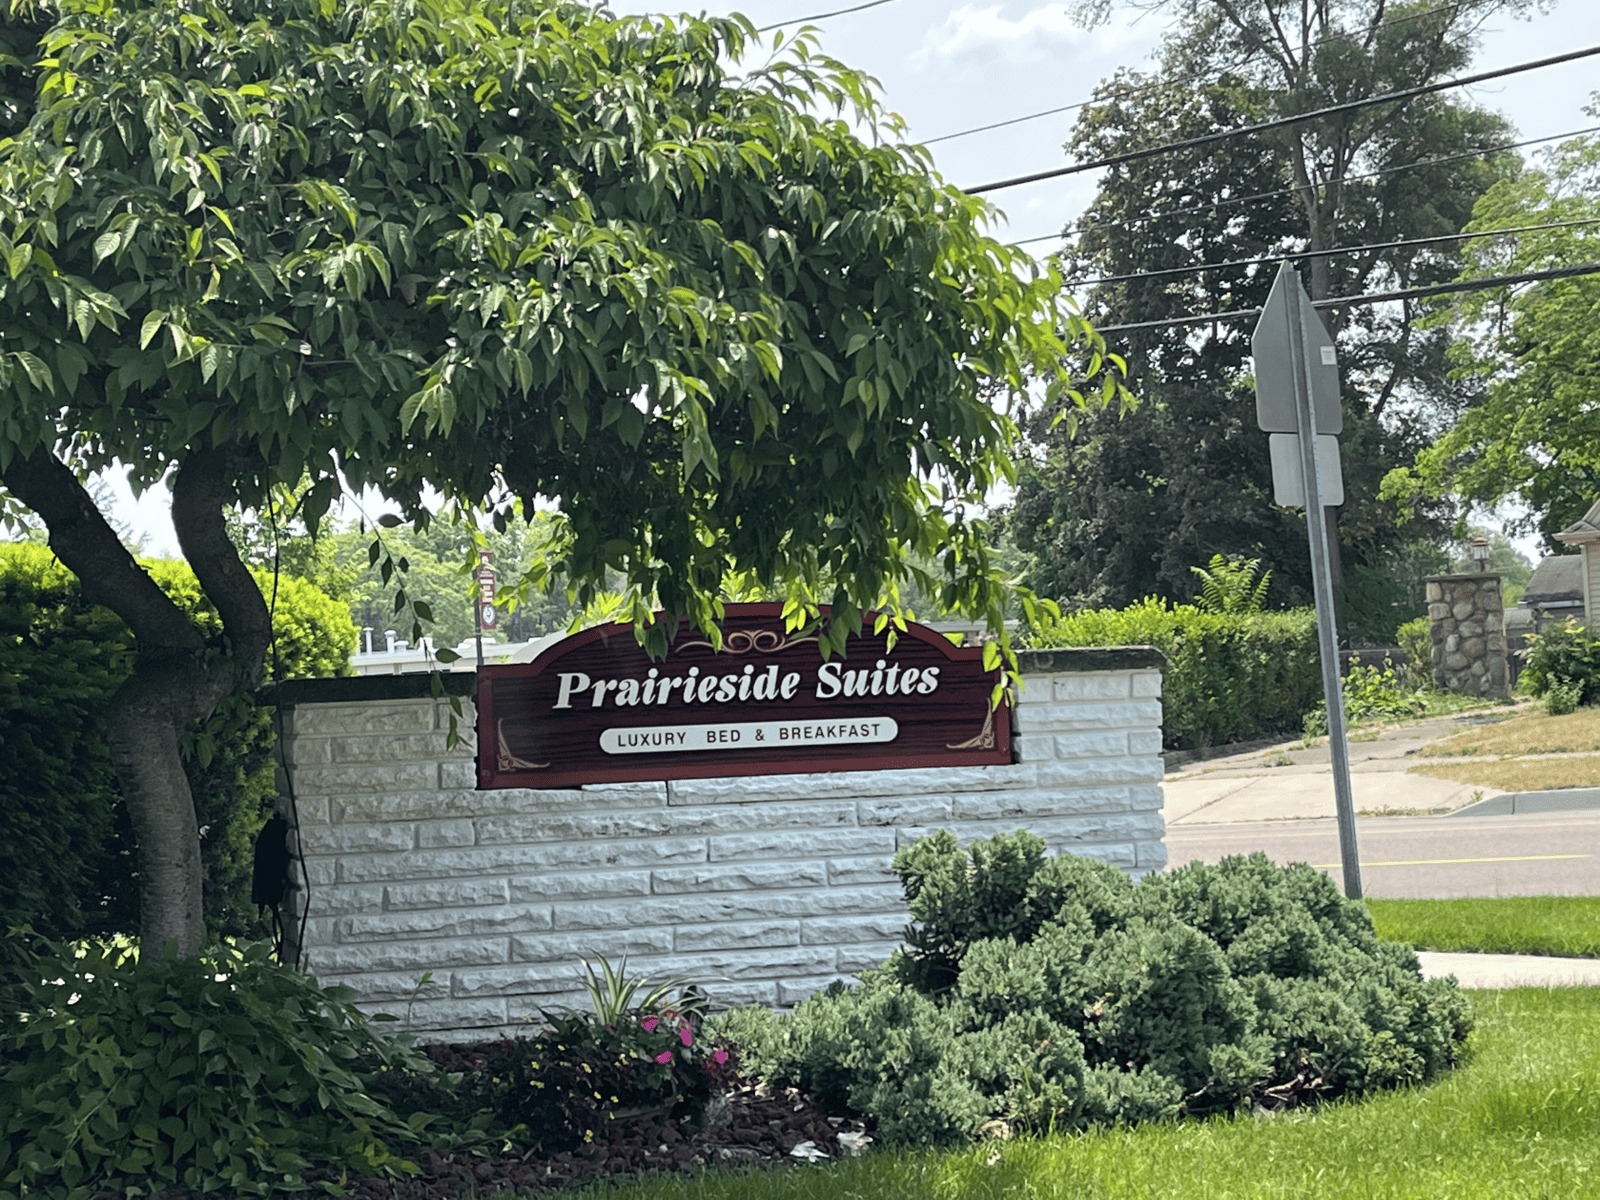 Prairieside Suites Sign on a Brick Wall